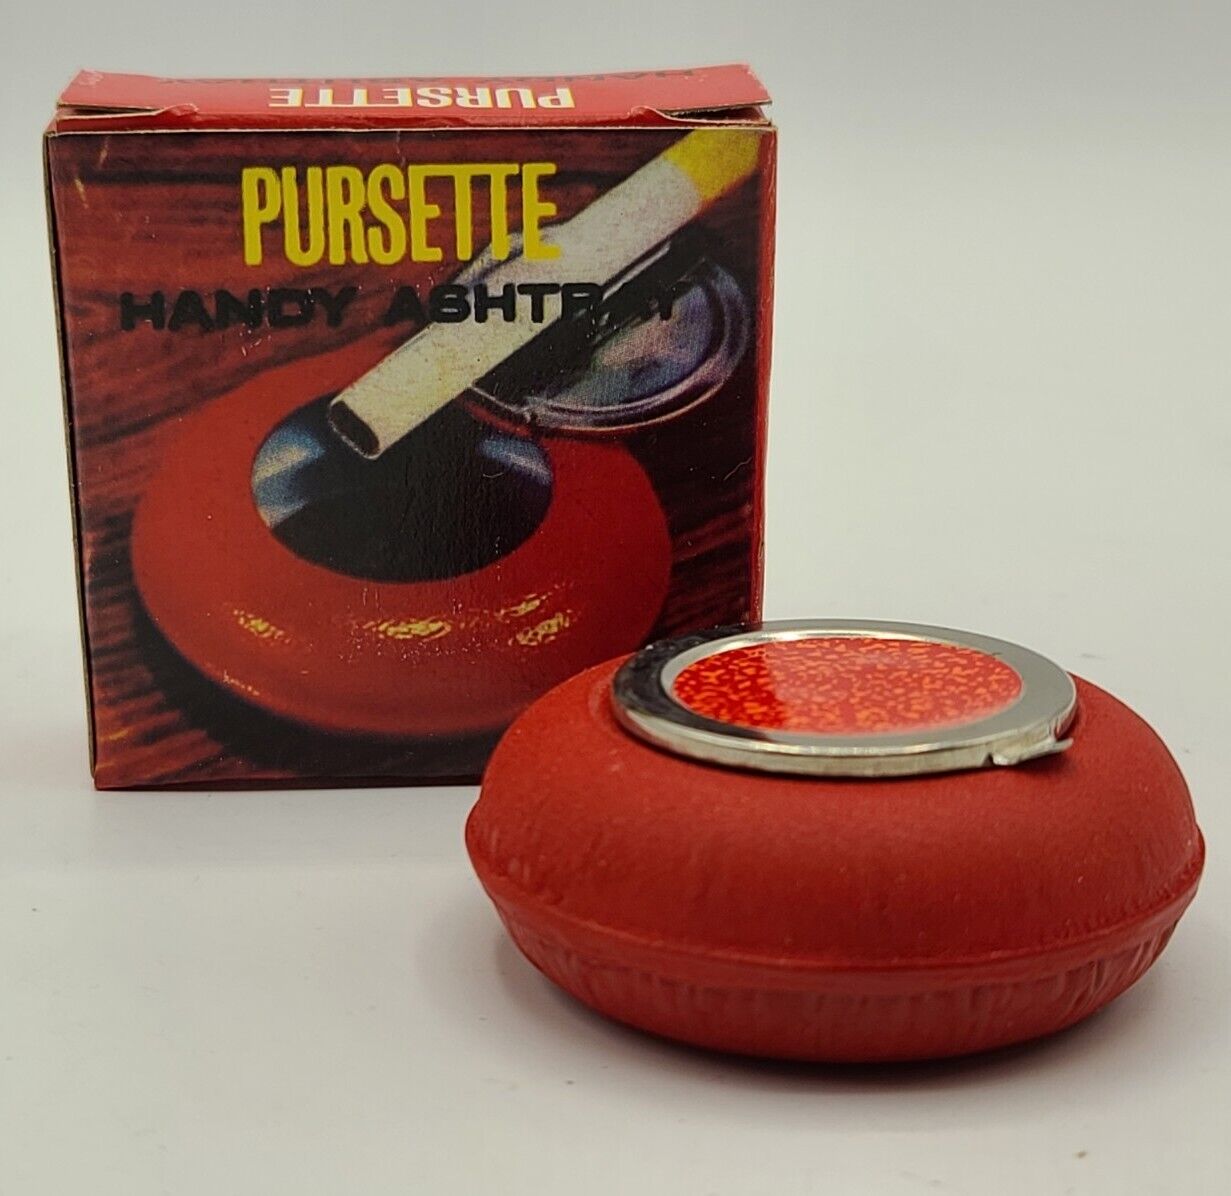 VINTAGE Pursette Handy Ashtray, RED ~ New Old Stock, Made in HONG KONG